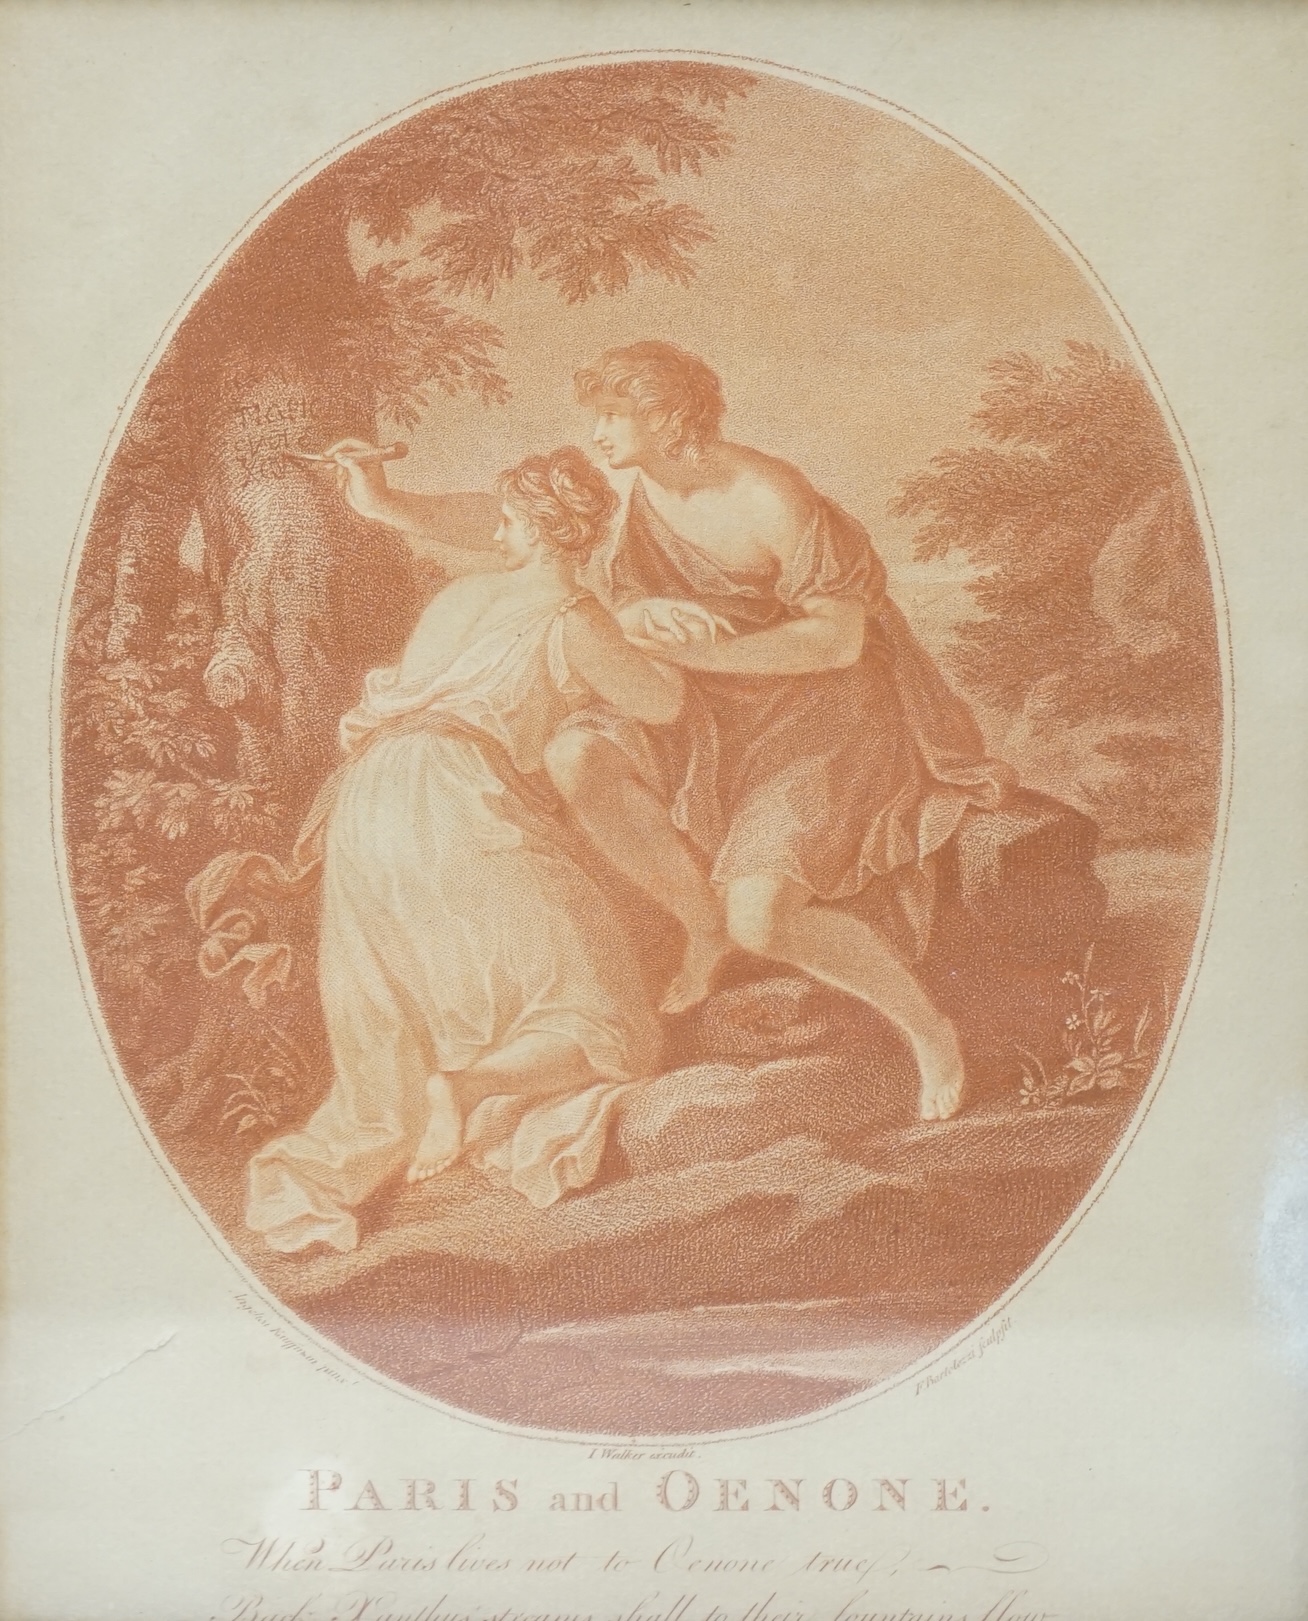 After Francesco Bartolozzi (Italian, 1727-1815), sanguine engraving, 'A century of prints from drawings published with notes by Charles Rogers’ and ‘Paris and Oenone’, largest 41 x 28cm. Condition - poor to fair, brownin